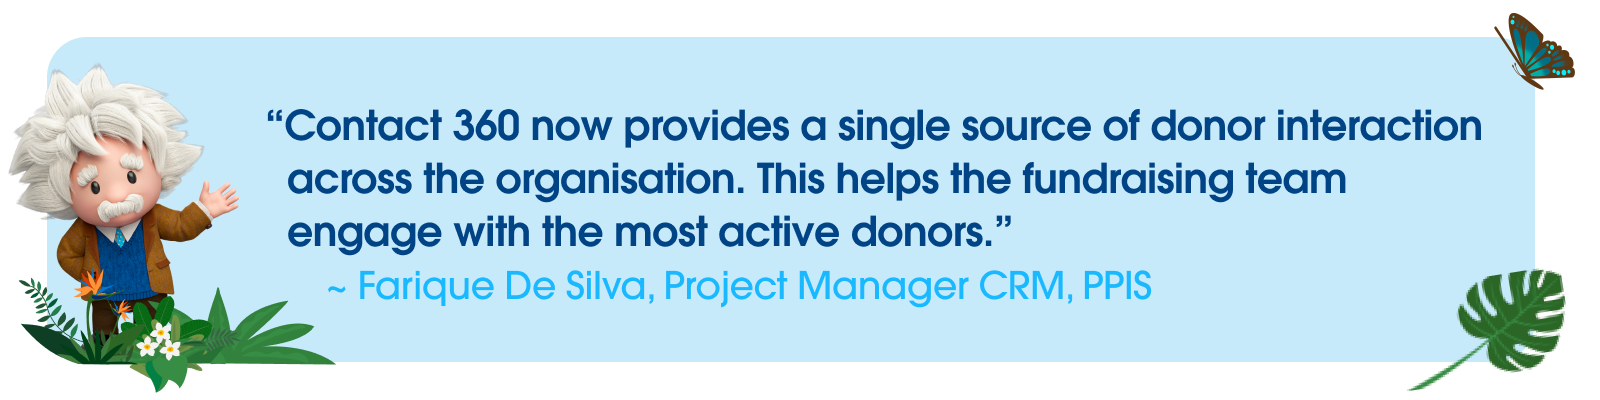 Farique De Silva, Project Manager CRM, PPIS describing how Contact 360 helps with donor interaction across the organisation.